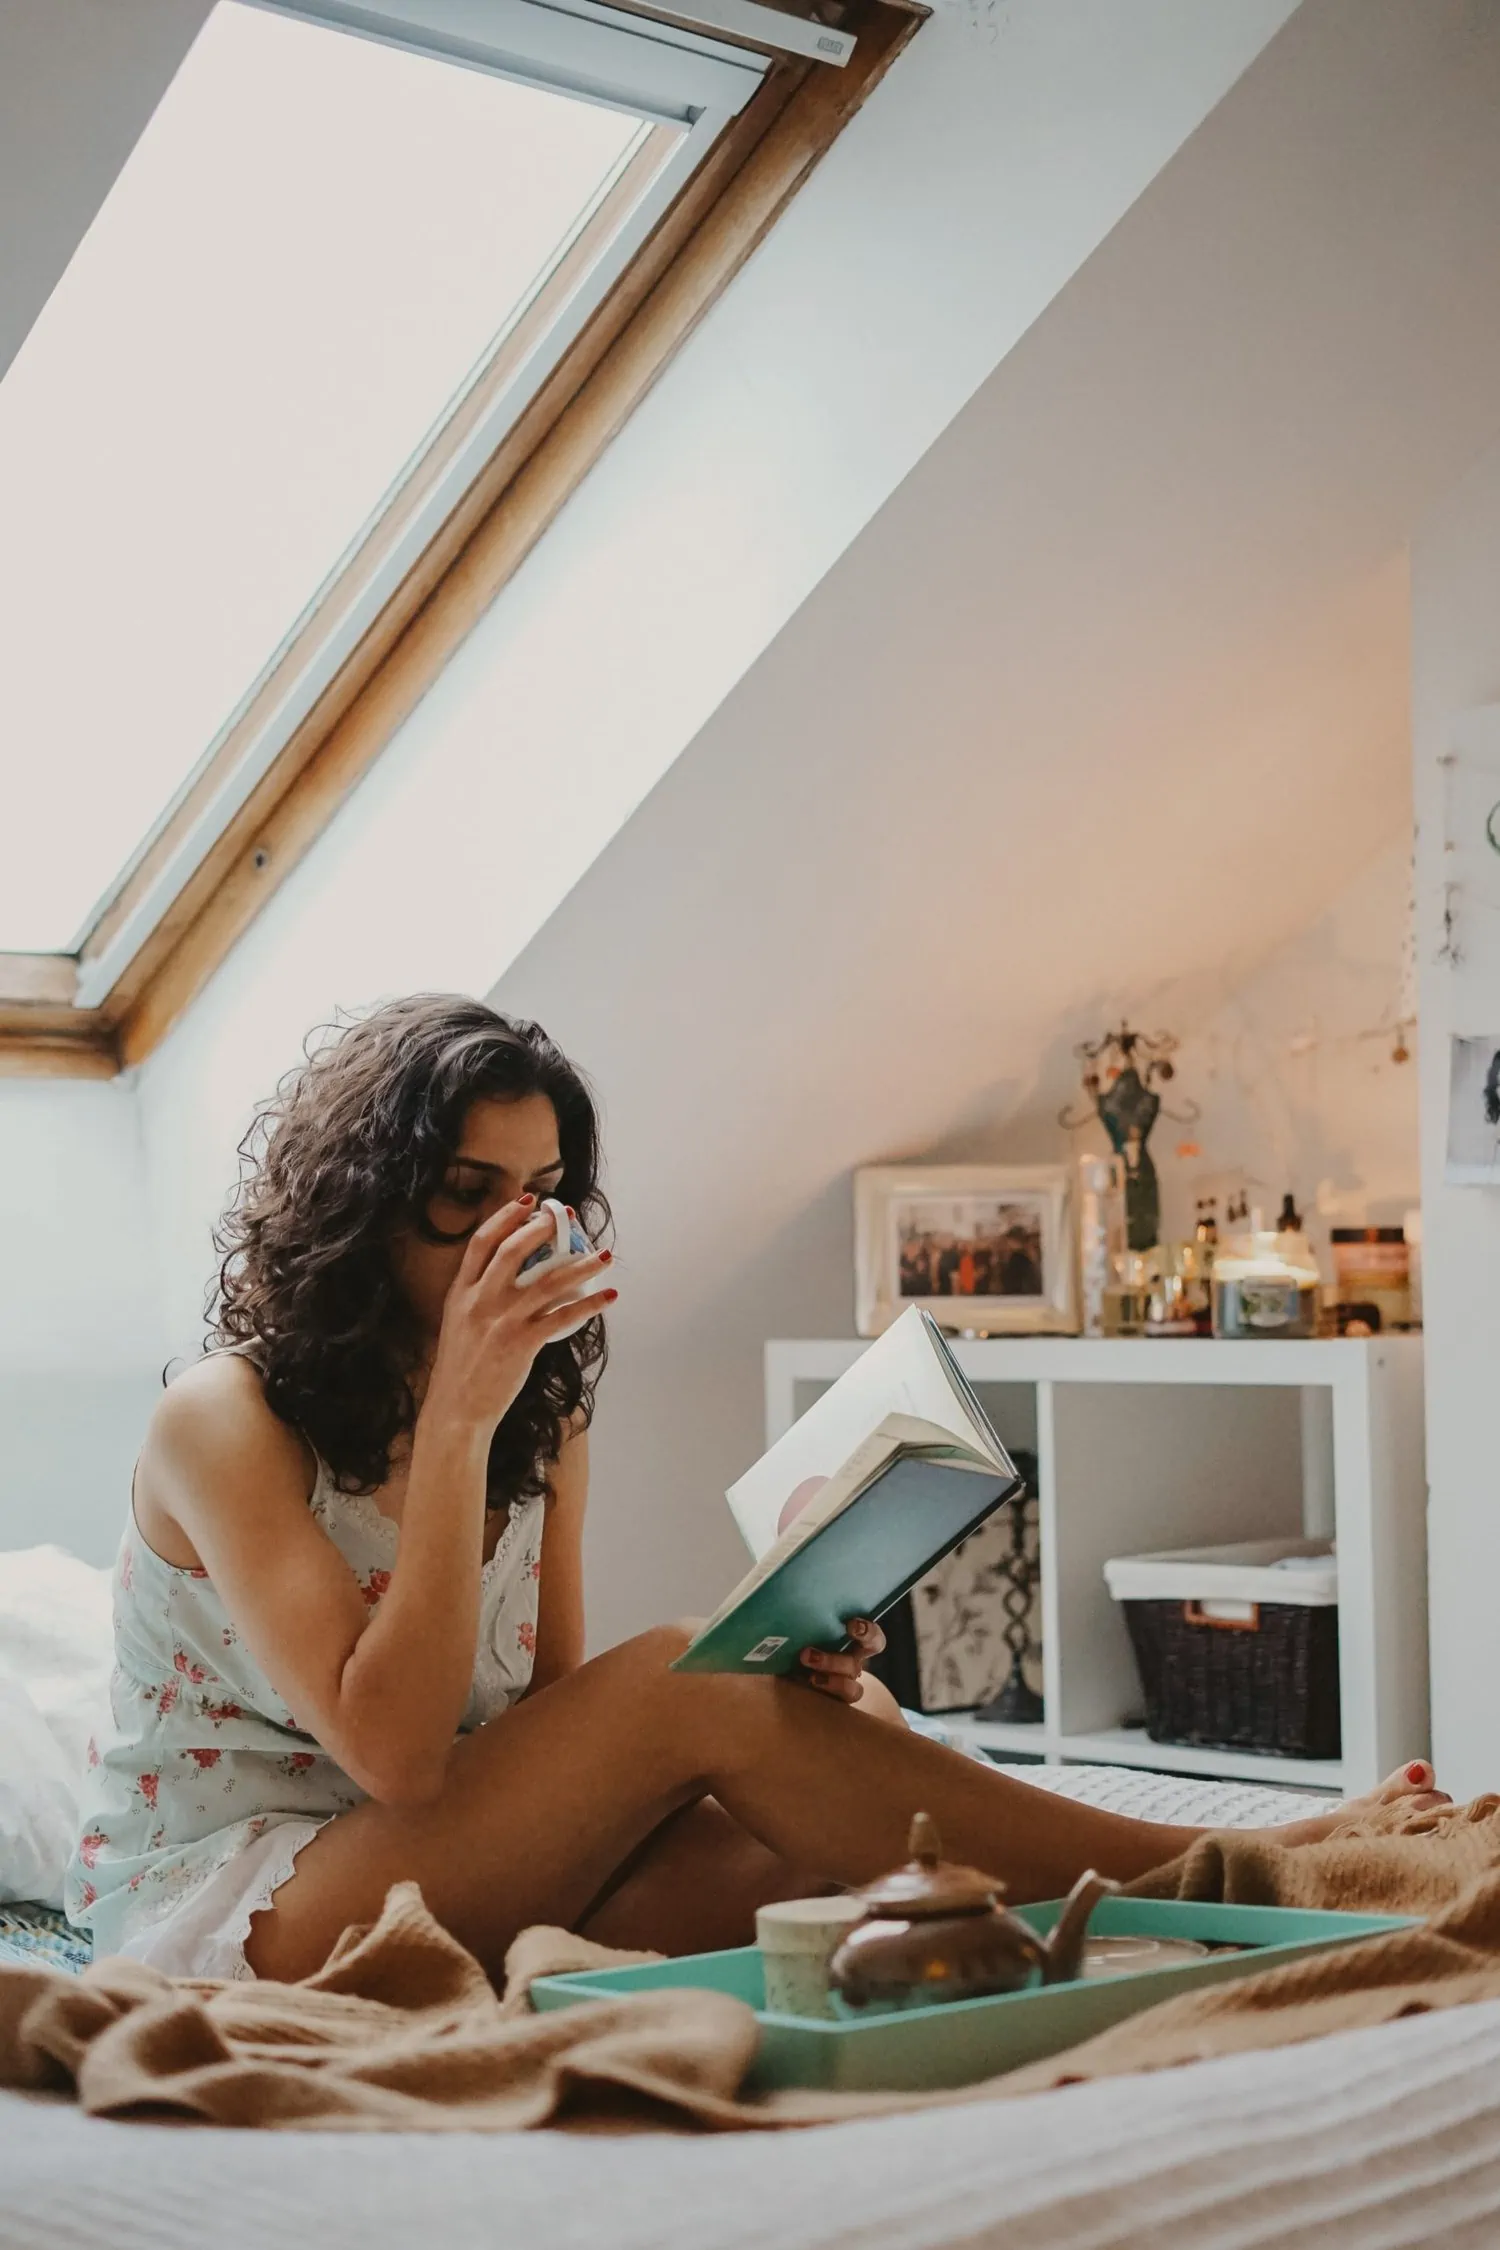 Woman reading her book and taking care of herself to heal from childhood trauma